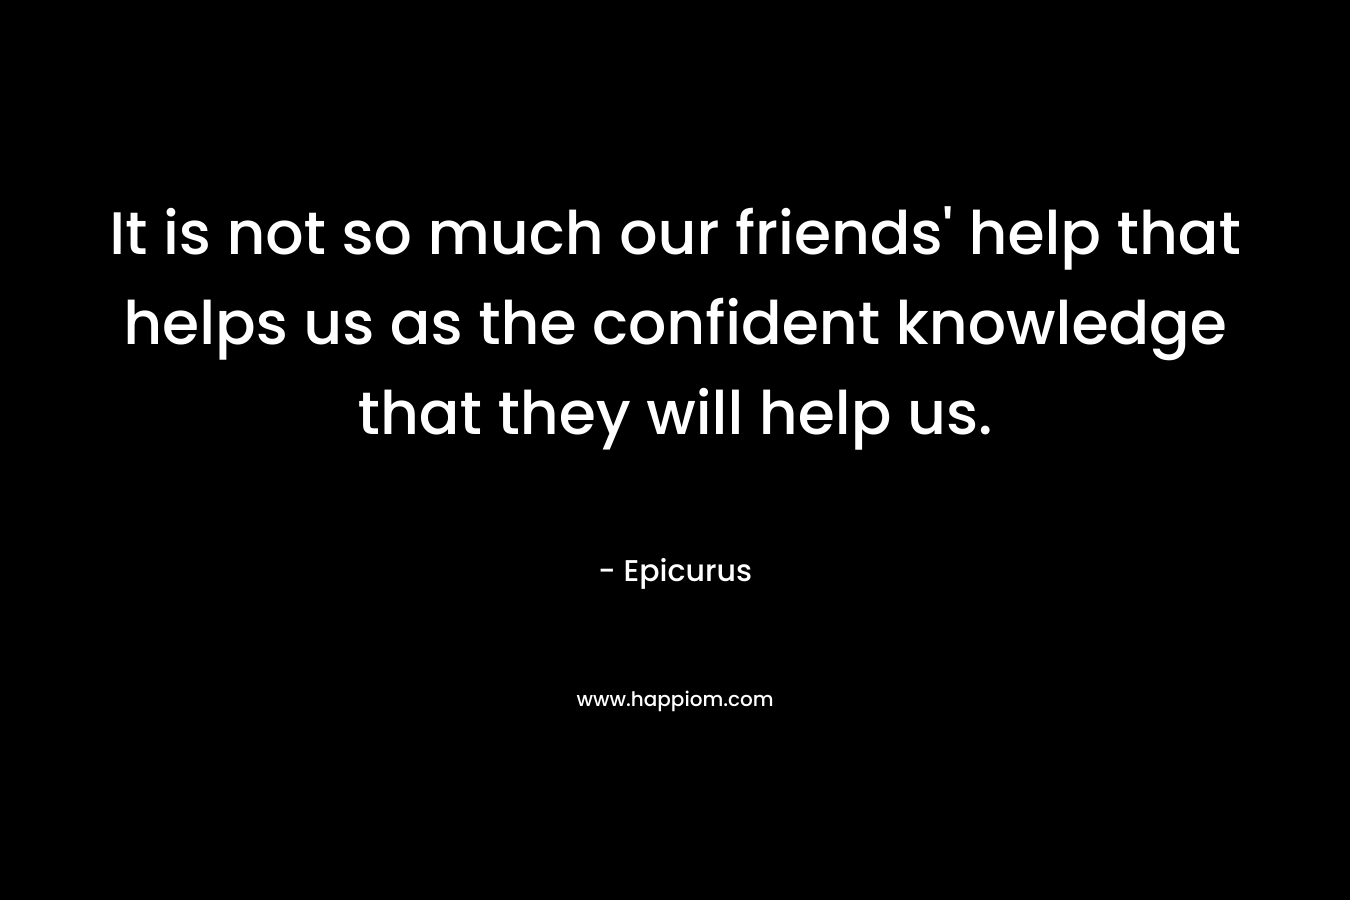 It is not so much our friends’ help that helps us as the confident knowledge that they will help us. – Epicurus